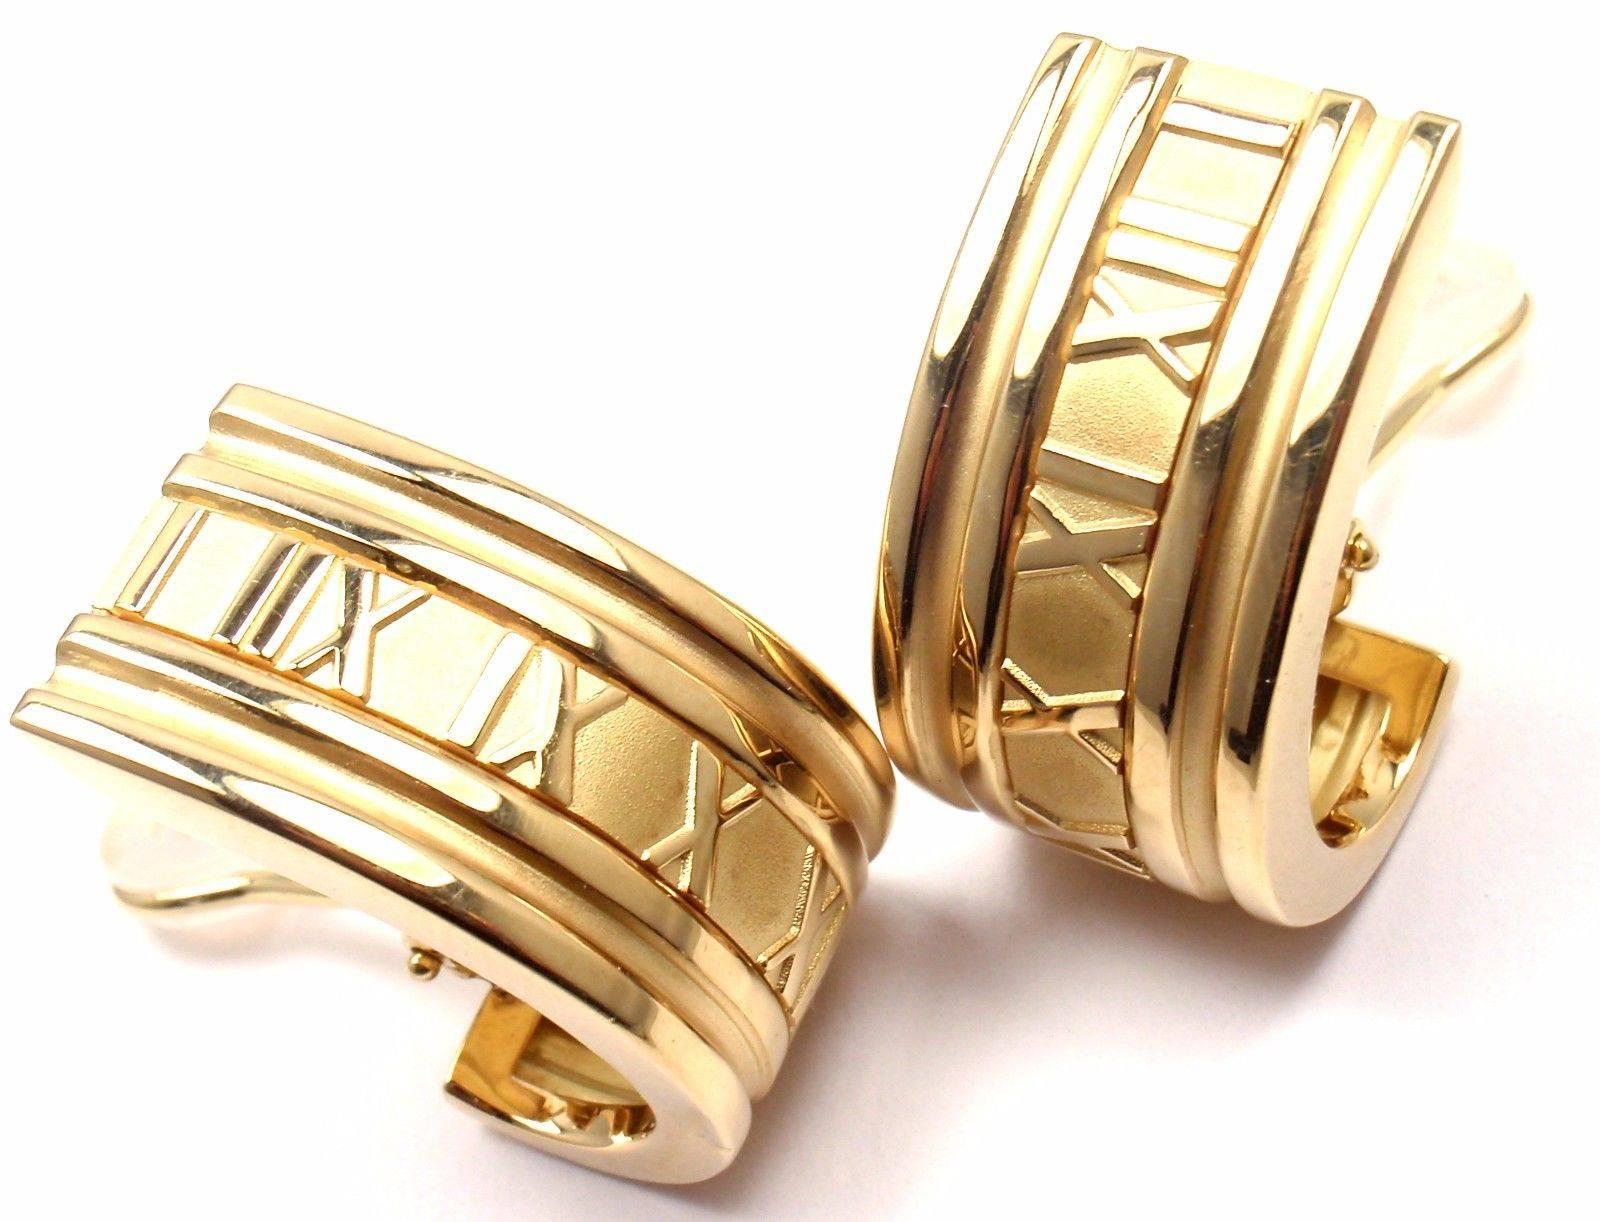 18k Yellow Gold Extra Large Atlas Hoop Earrings by Tiffany & Co.  
These earrings have collapsible posts with omega backs.  

Details:  
Measurements: 31mm x 16mm  
Weight:  25.6 grams
Stamped Hallmarks: Tiffany & Co, 750, 1995, Italy

*Free